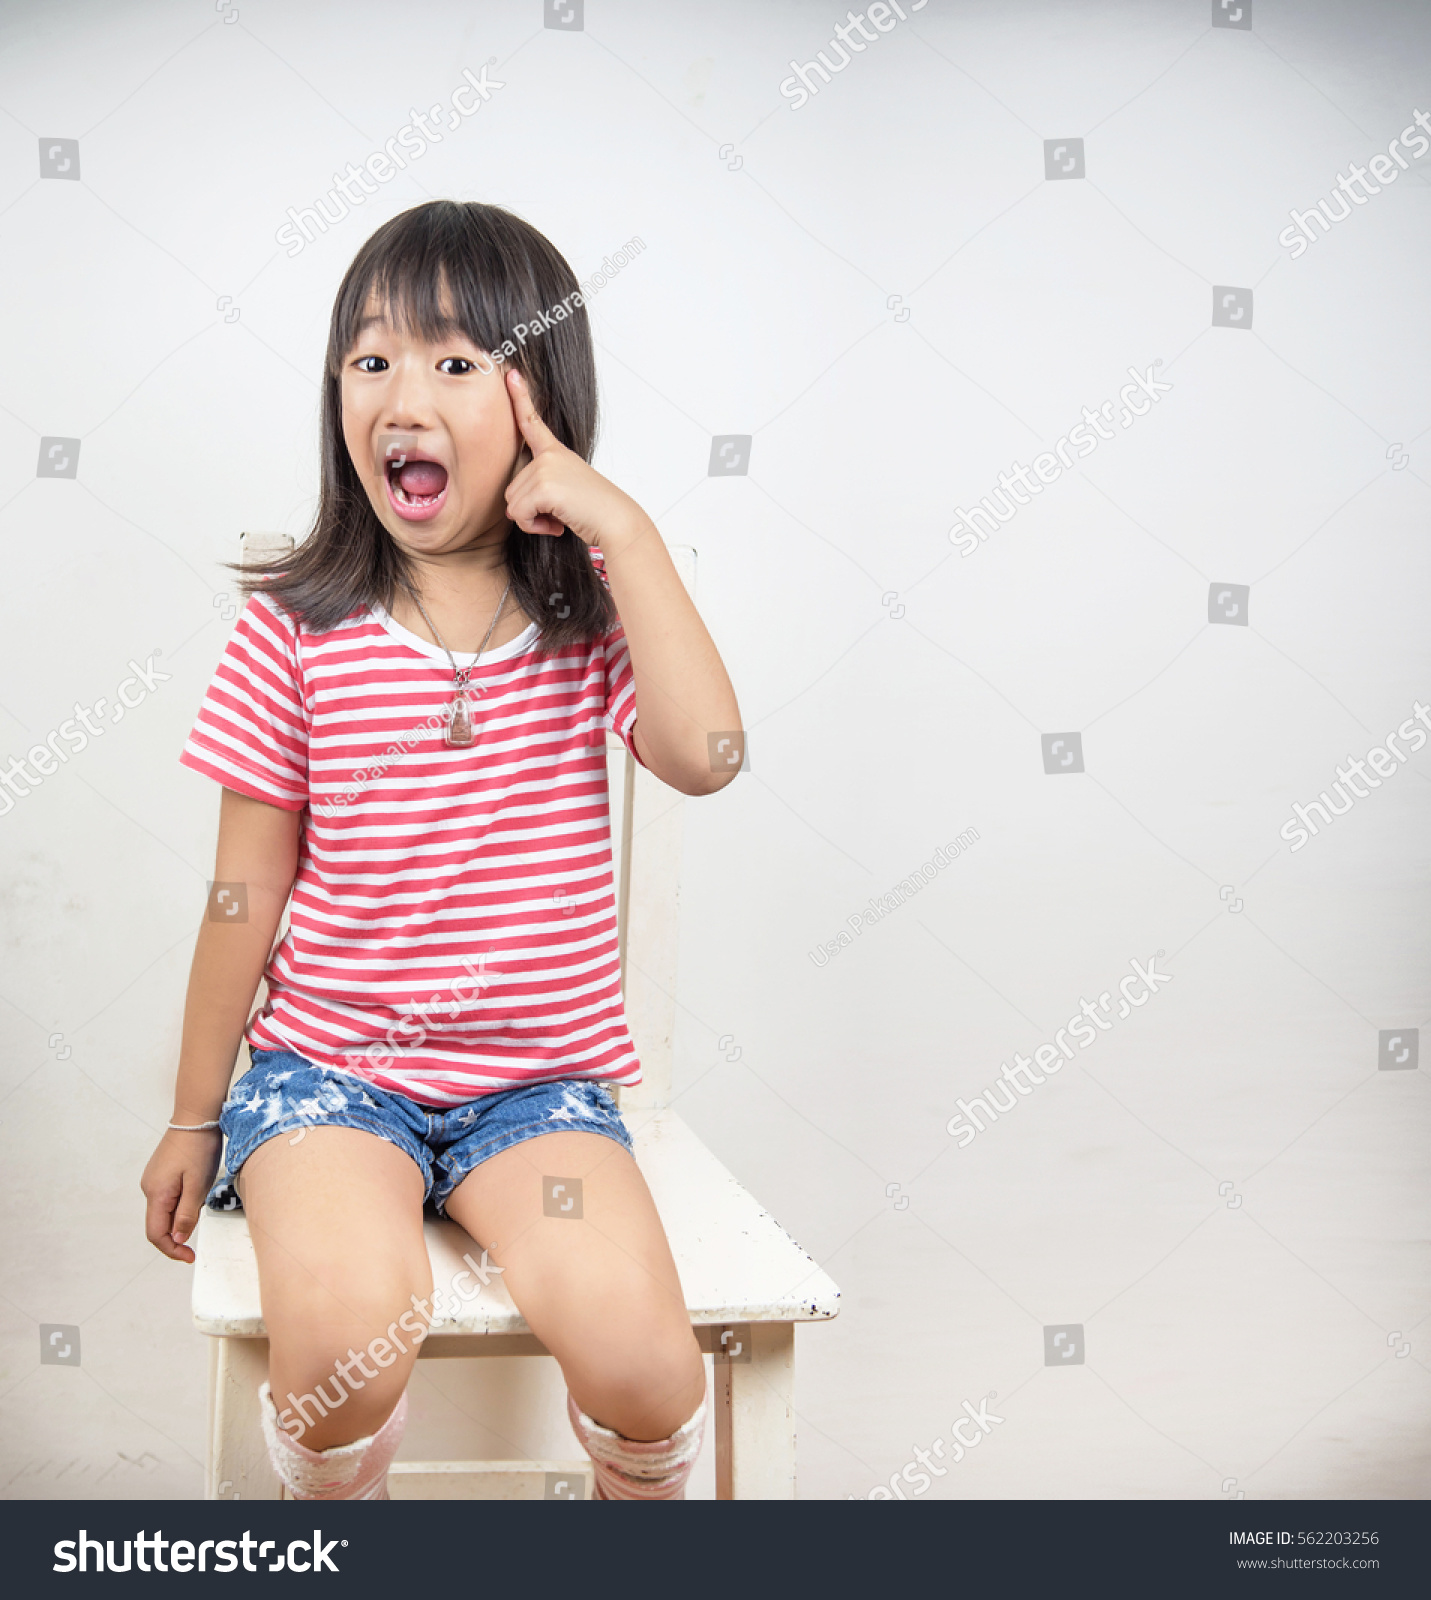 Clever little girl Asian with a bright idea pointing upwards with her finger to gain attention Isolated on white with blank copyspace above her finger #562203256